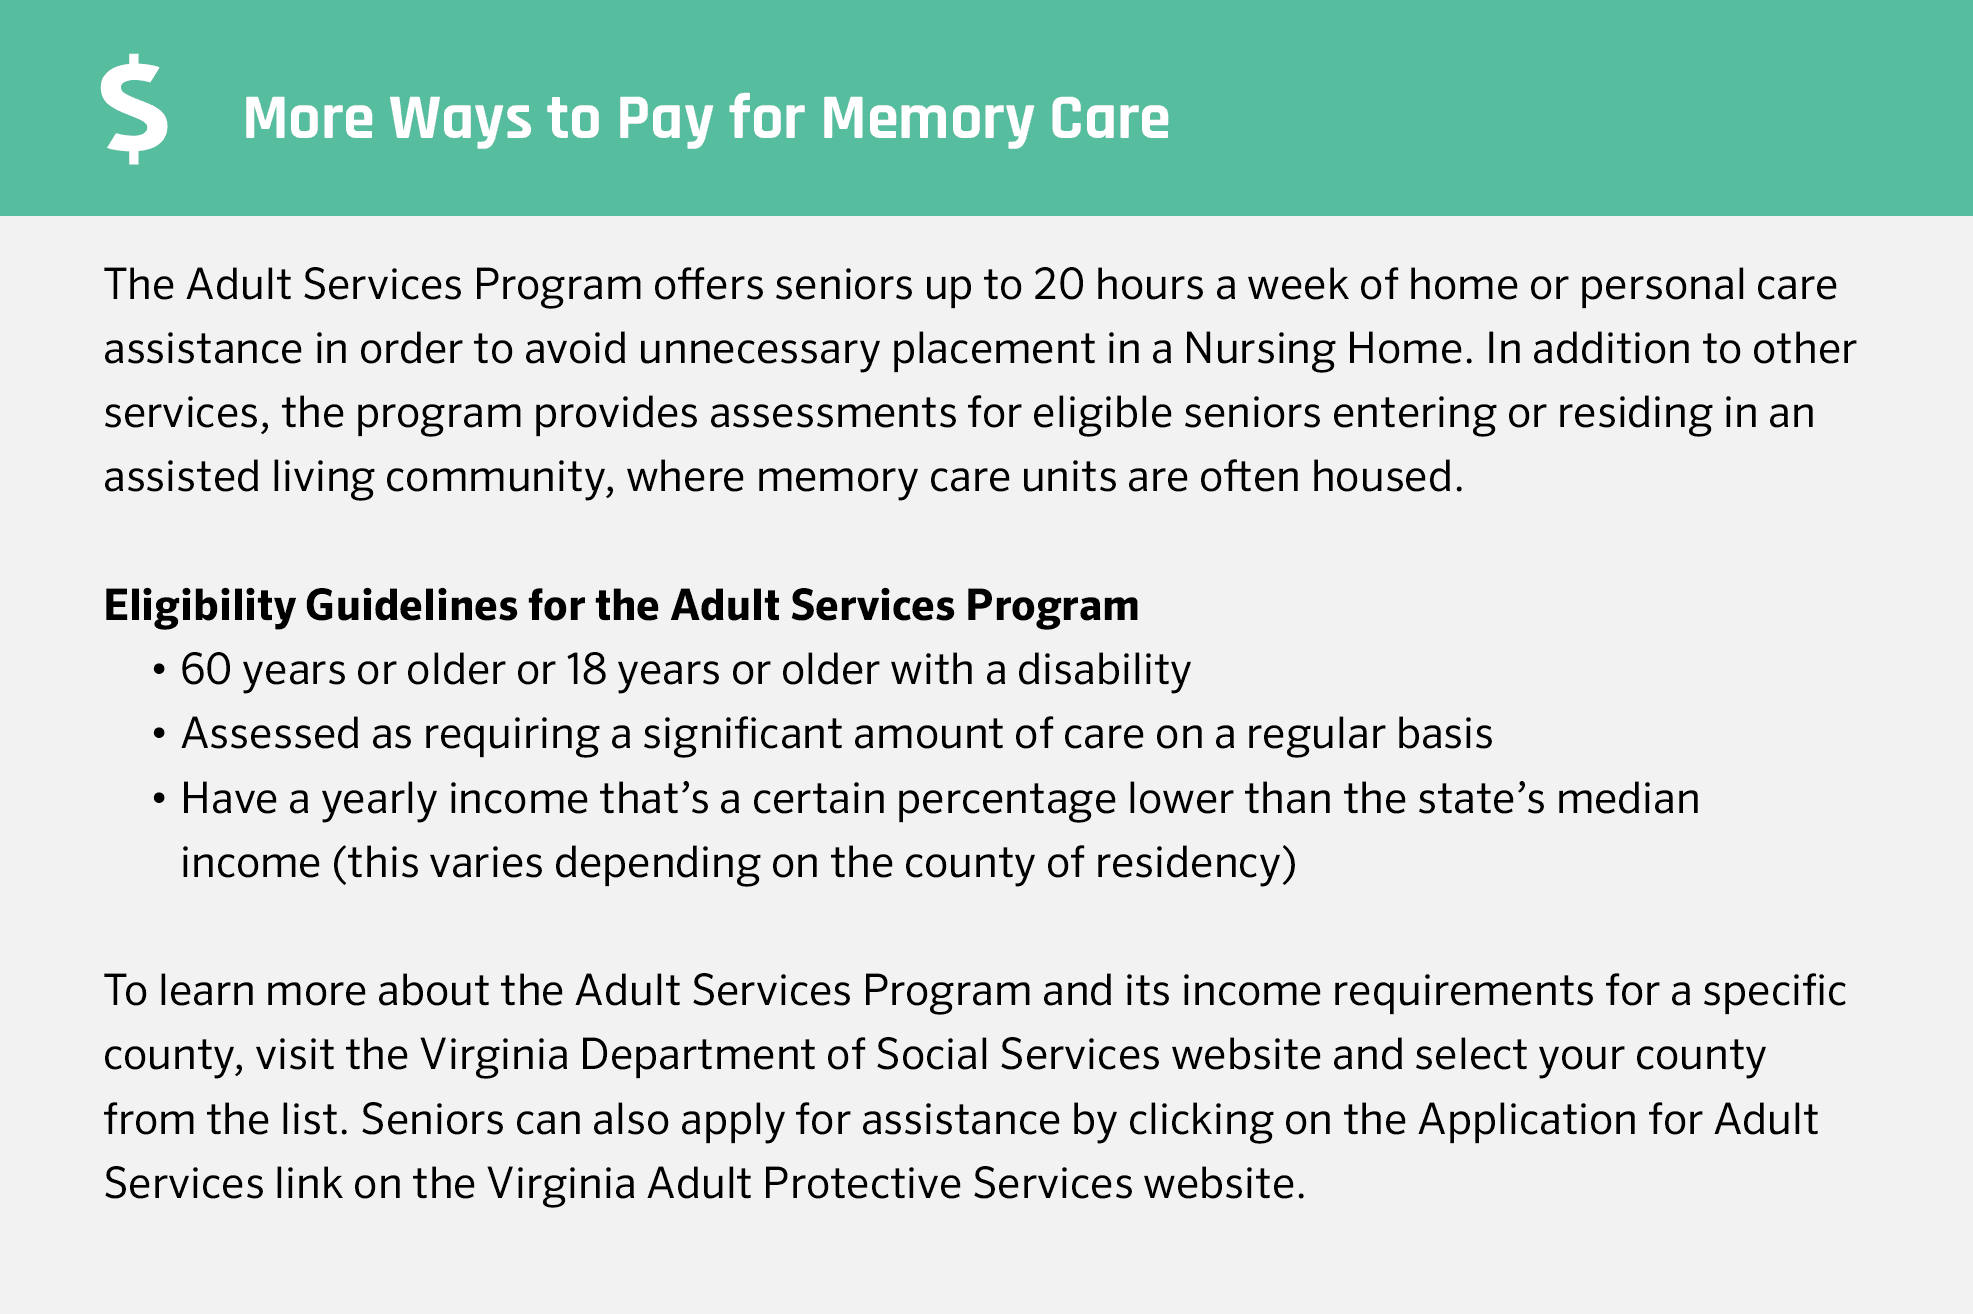 More ways to pay for memory care in Virginia